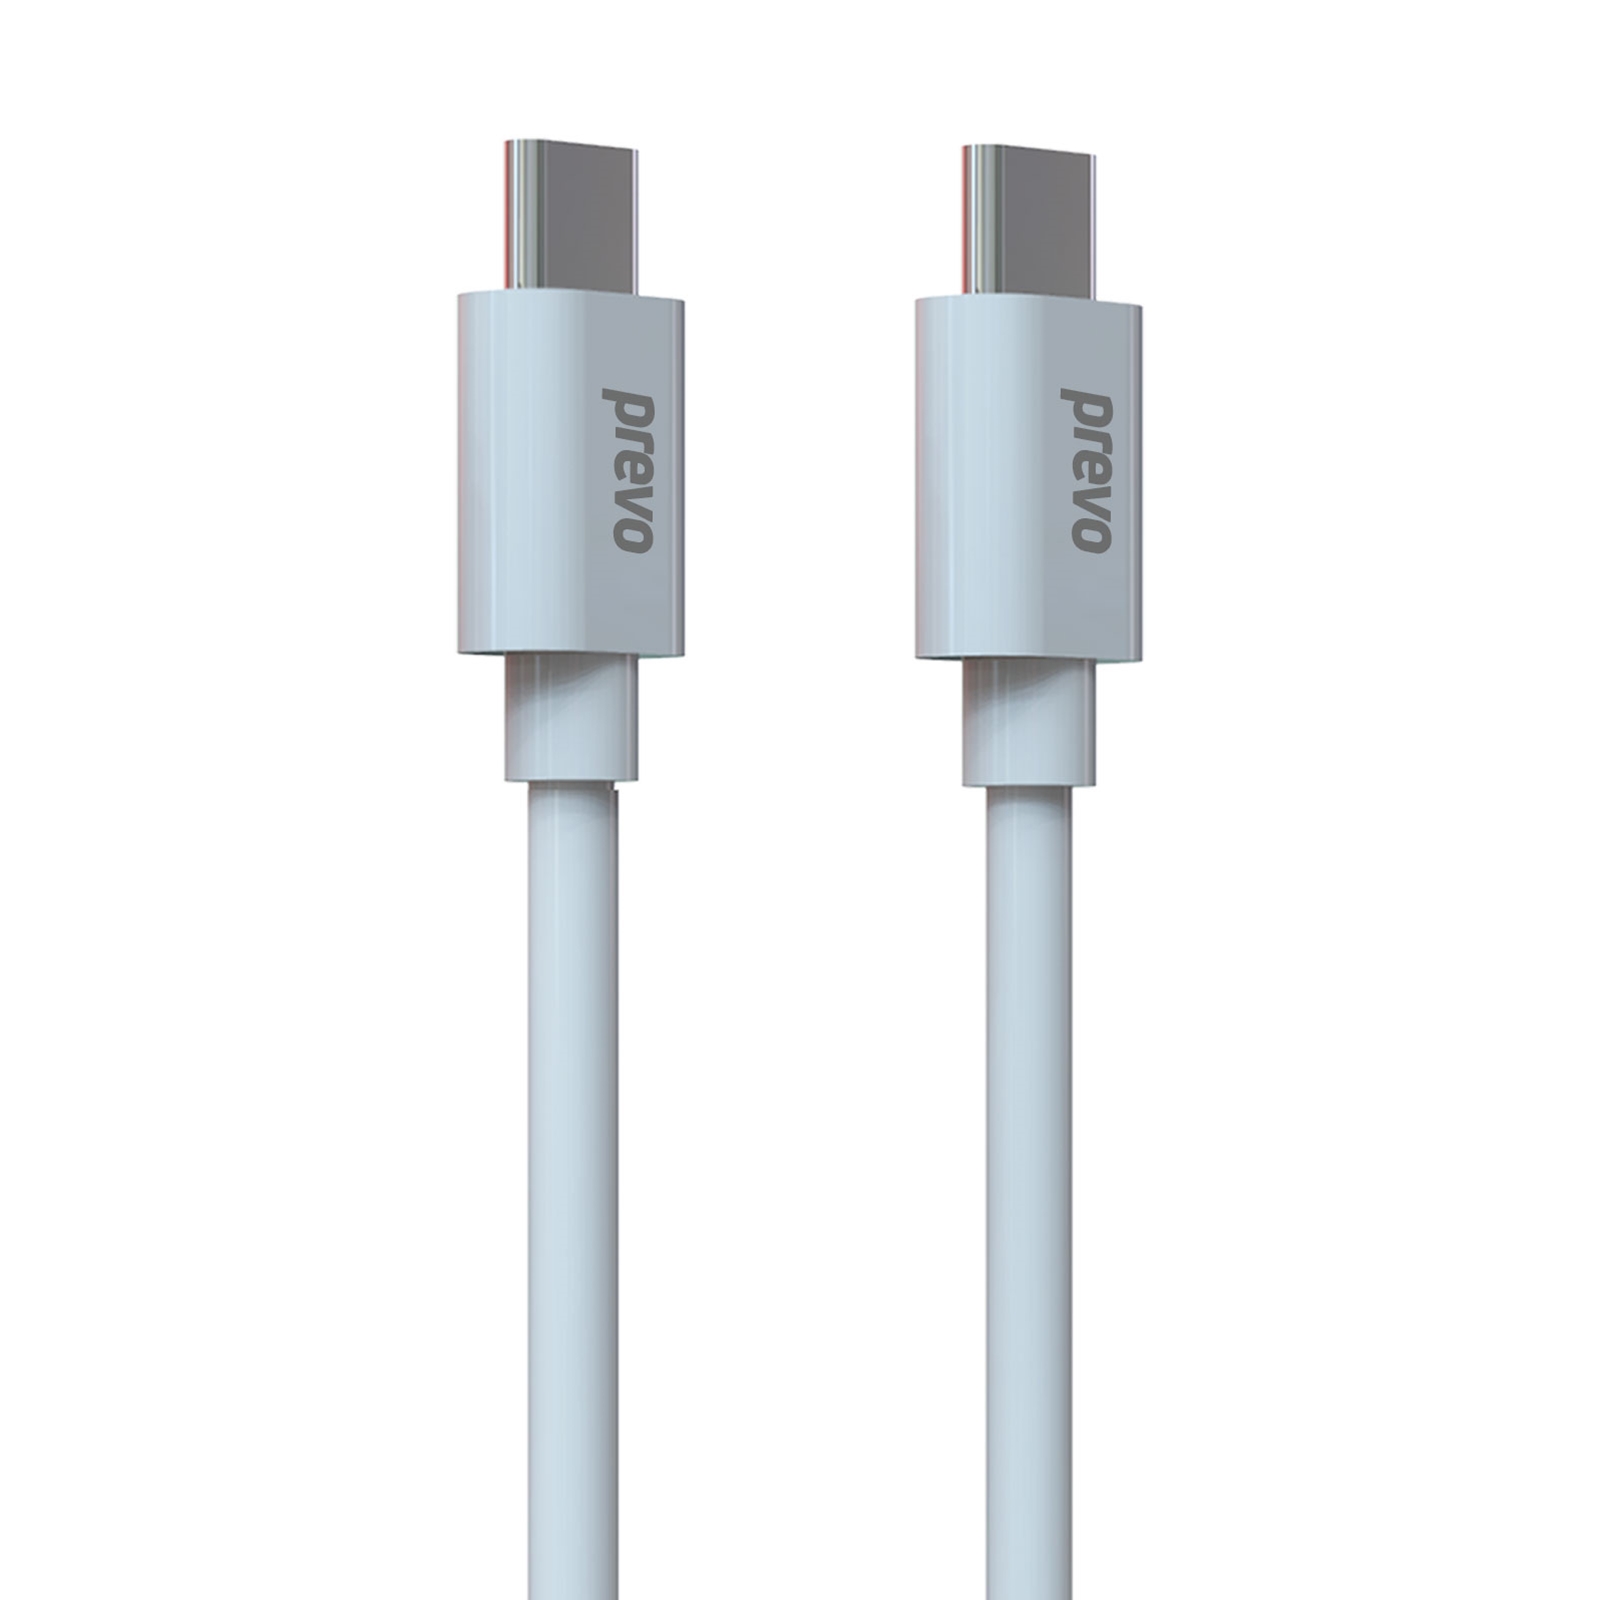 Prevo USB 2.0 60W C to C PVC cable, 20V/3A, 480Mbps, White, Superior Design & Performance, Retail Box Packaging